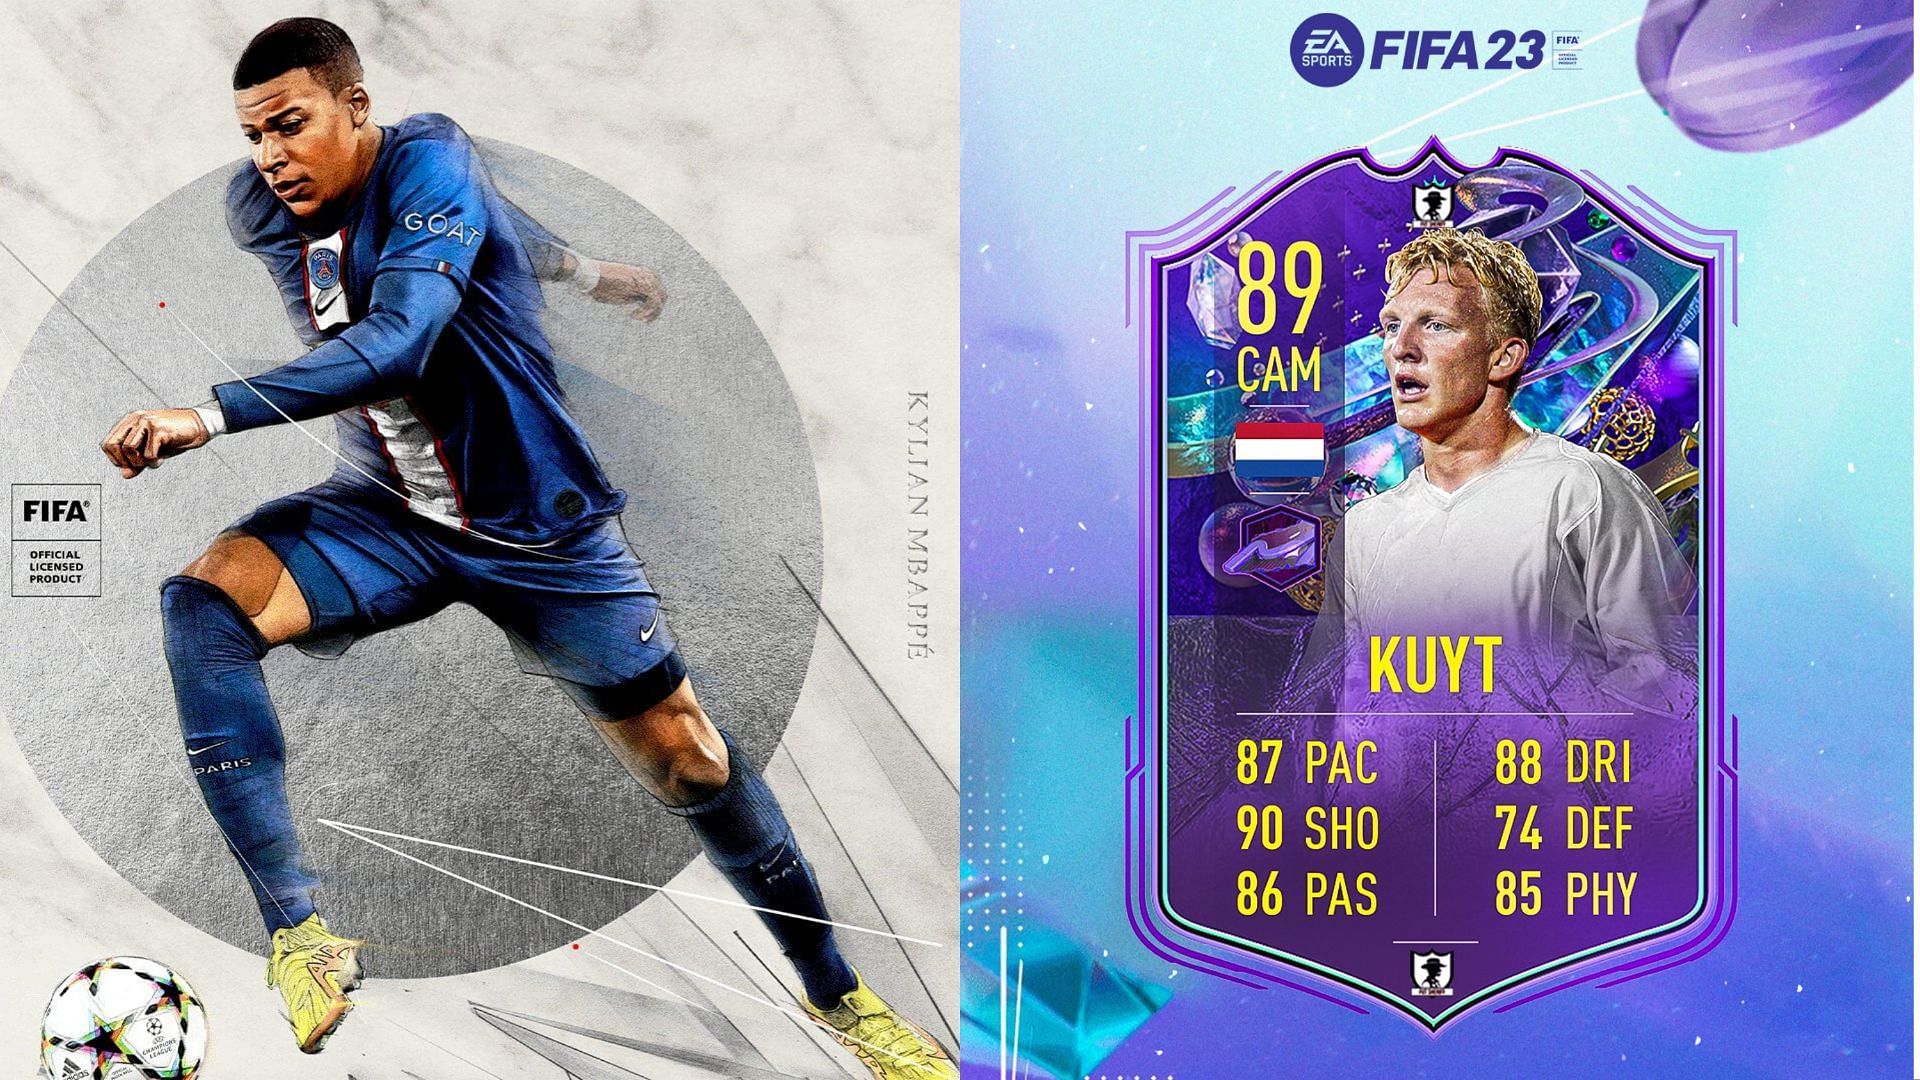 The Dirk Kuyt Fantasy FUT card will be a great alternative for FIFA 23 players to choose from (Images via EA Sports, Twitter/FUT Sheriff)